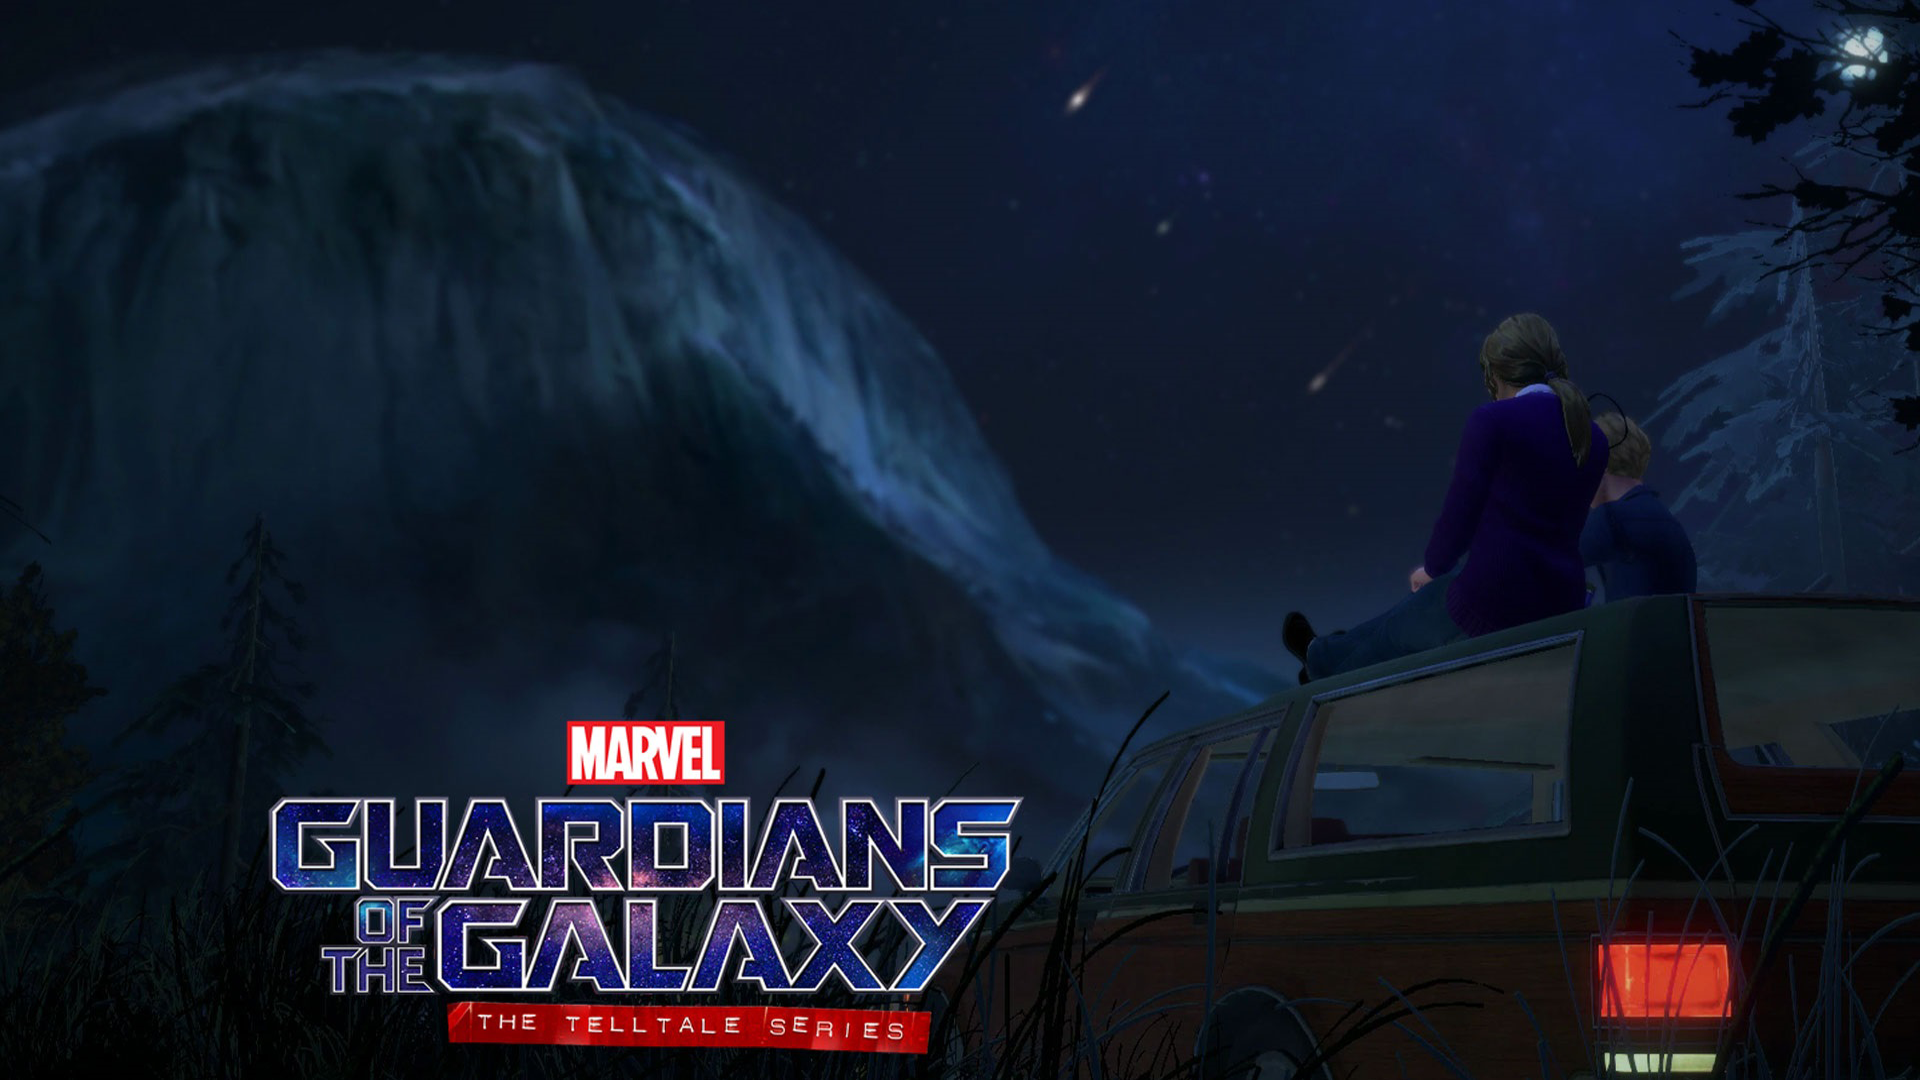 Let’s Play Marvel’s Guardians of the Galaxy: The Telltale Series